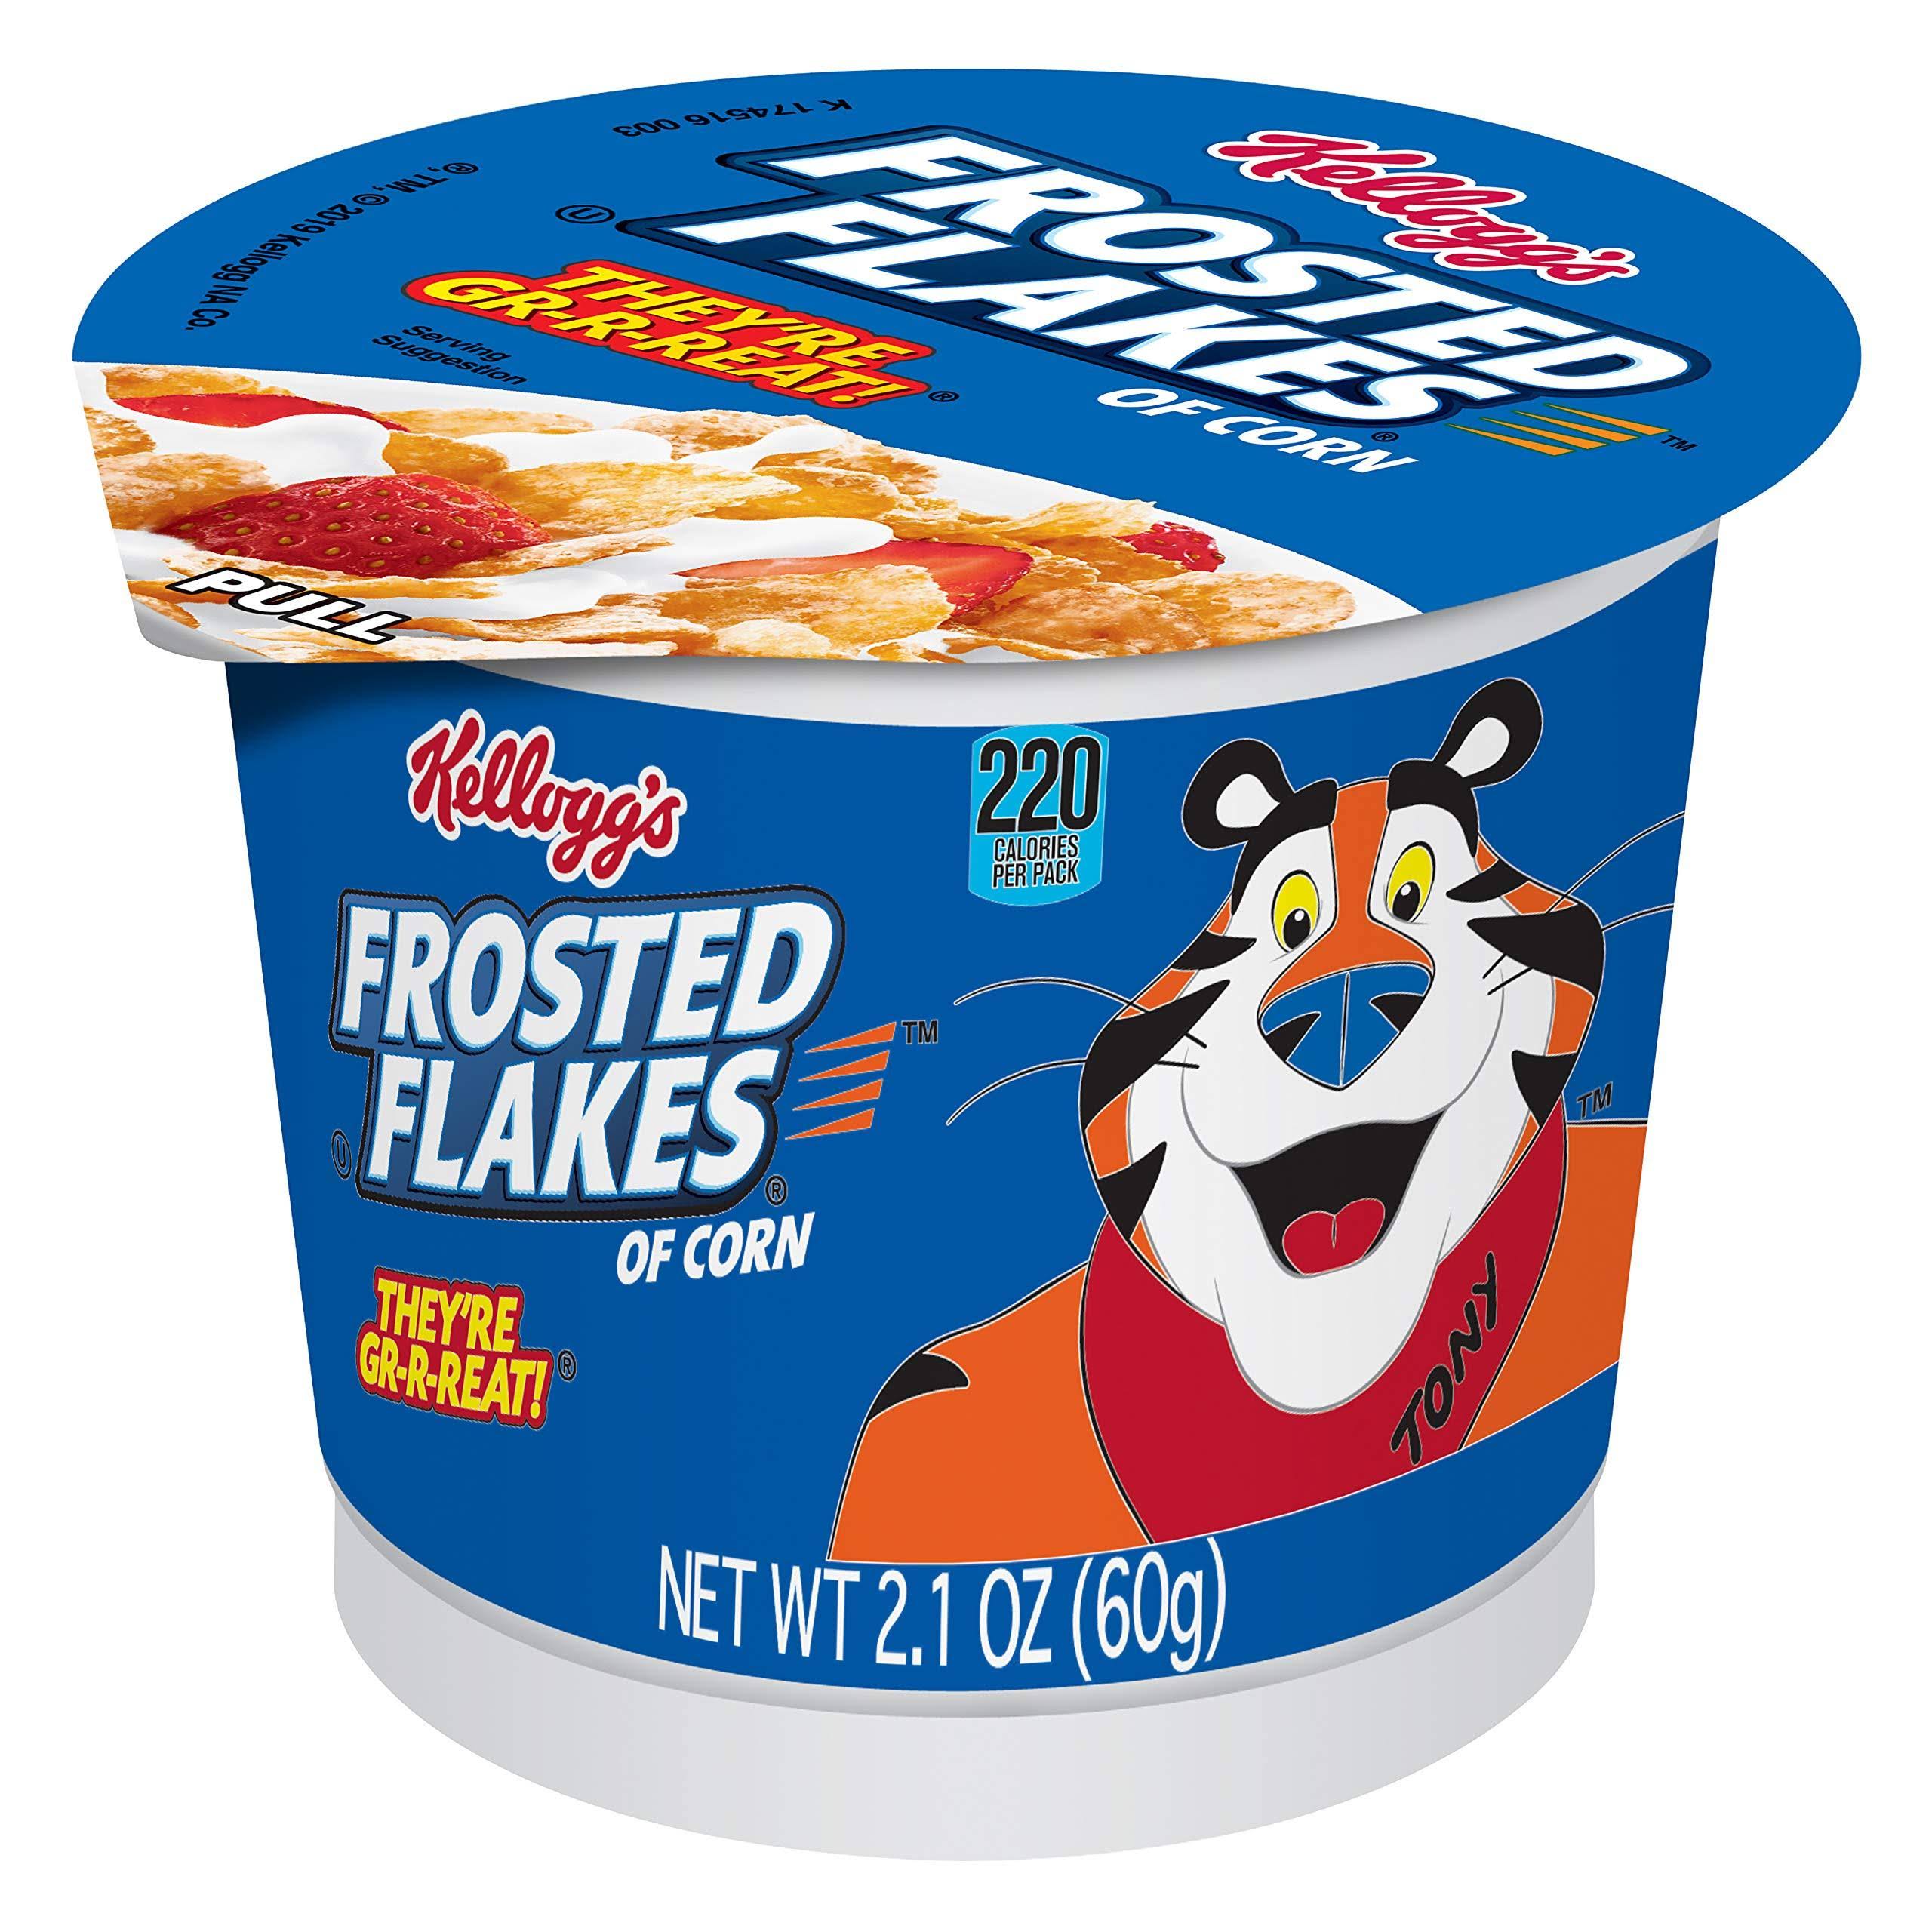 Kellogg's Frosted Flakes of Corn Cereal - 2.1 oz